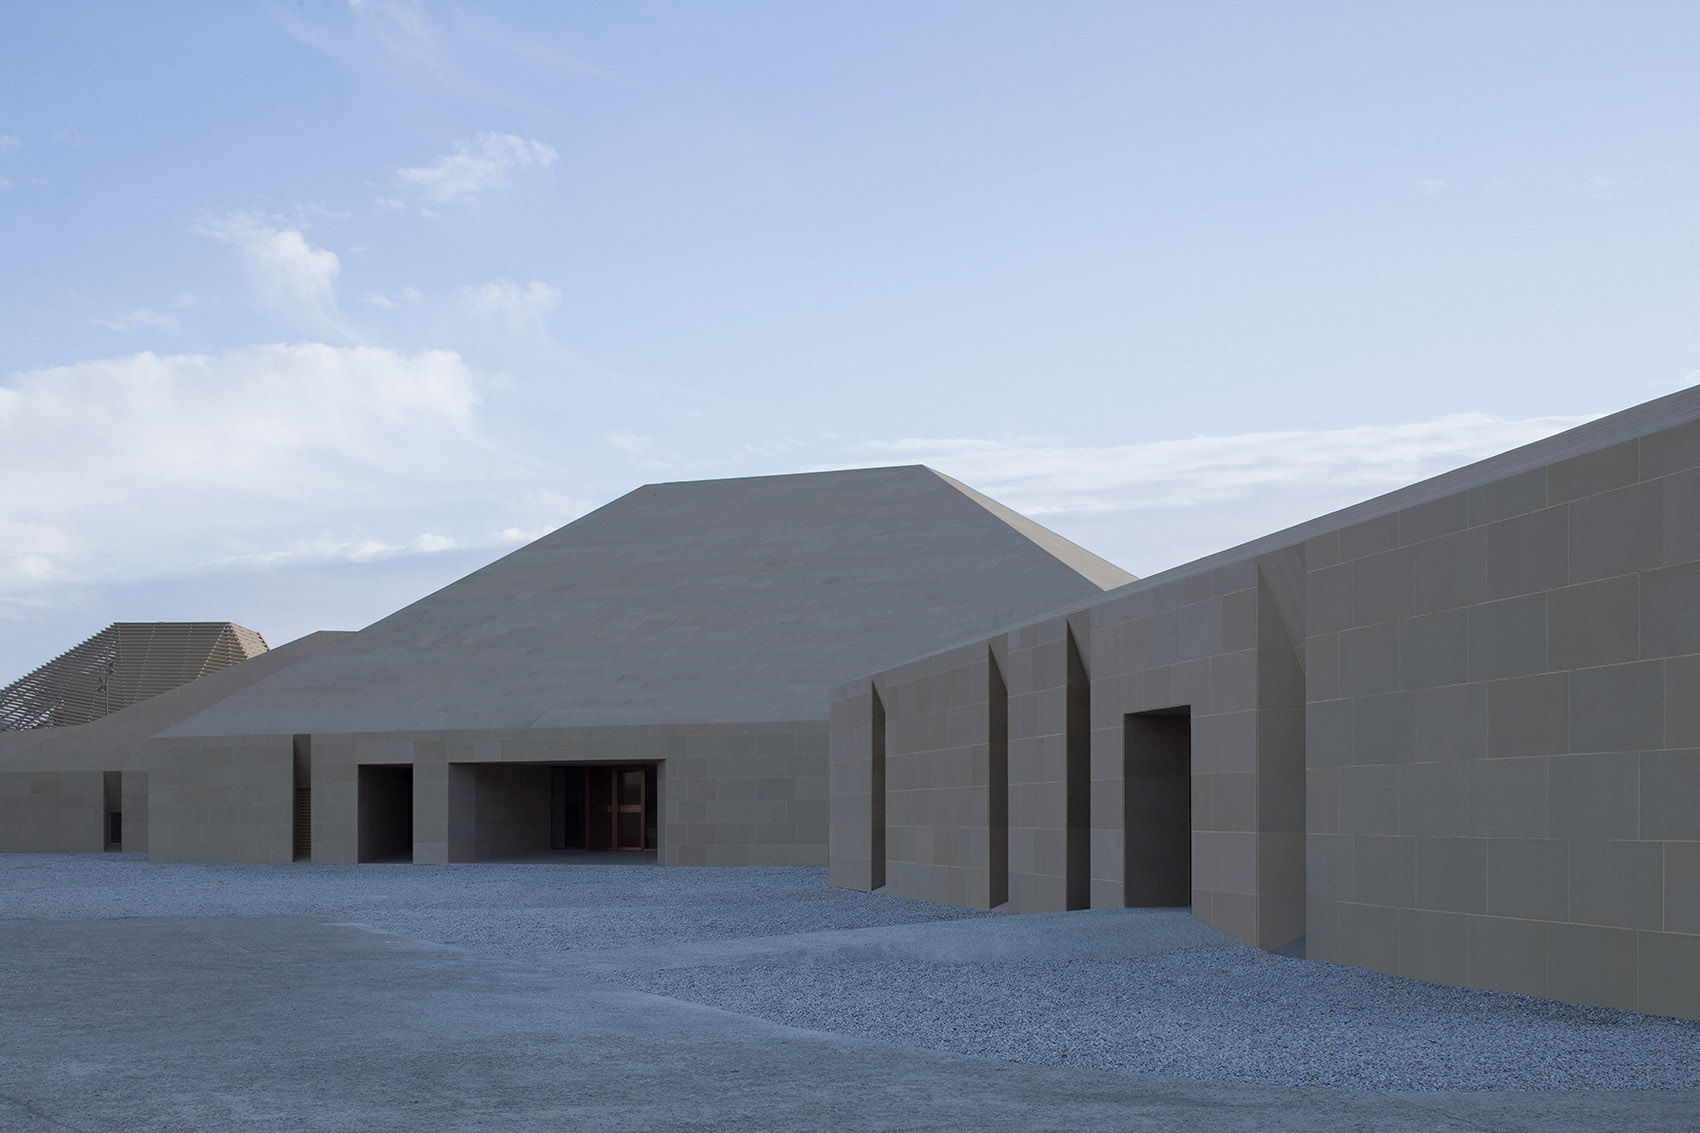 007-dunhuang-tourism-distributing-center-china-by-biad-zxd-architects.jpg